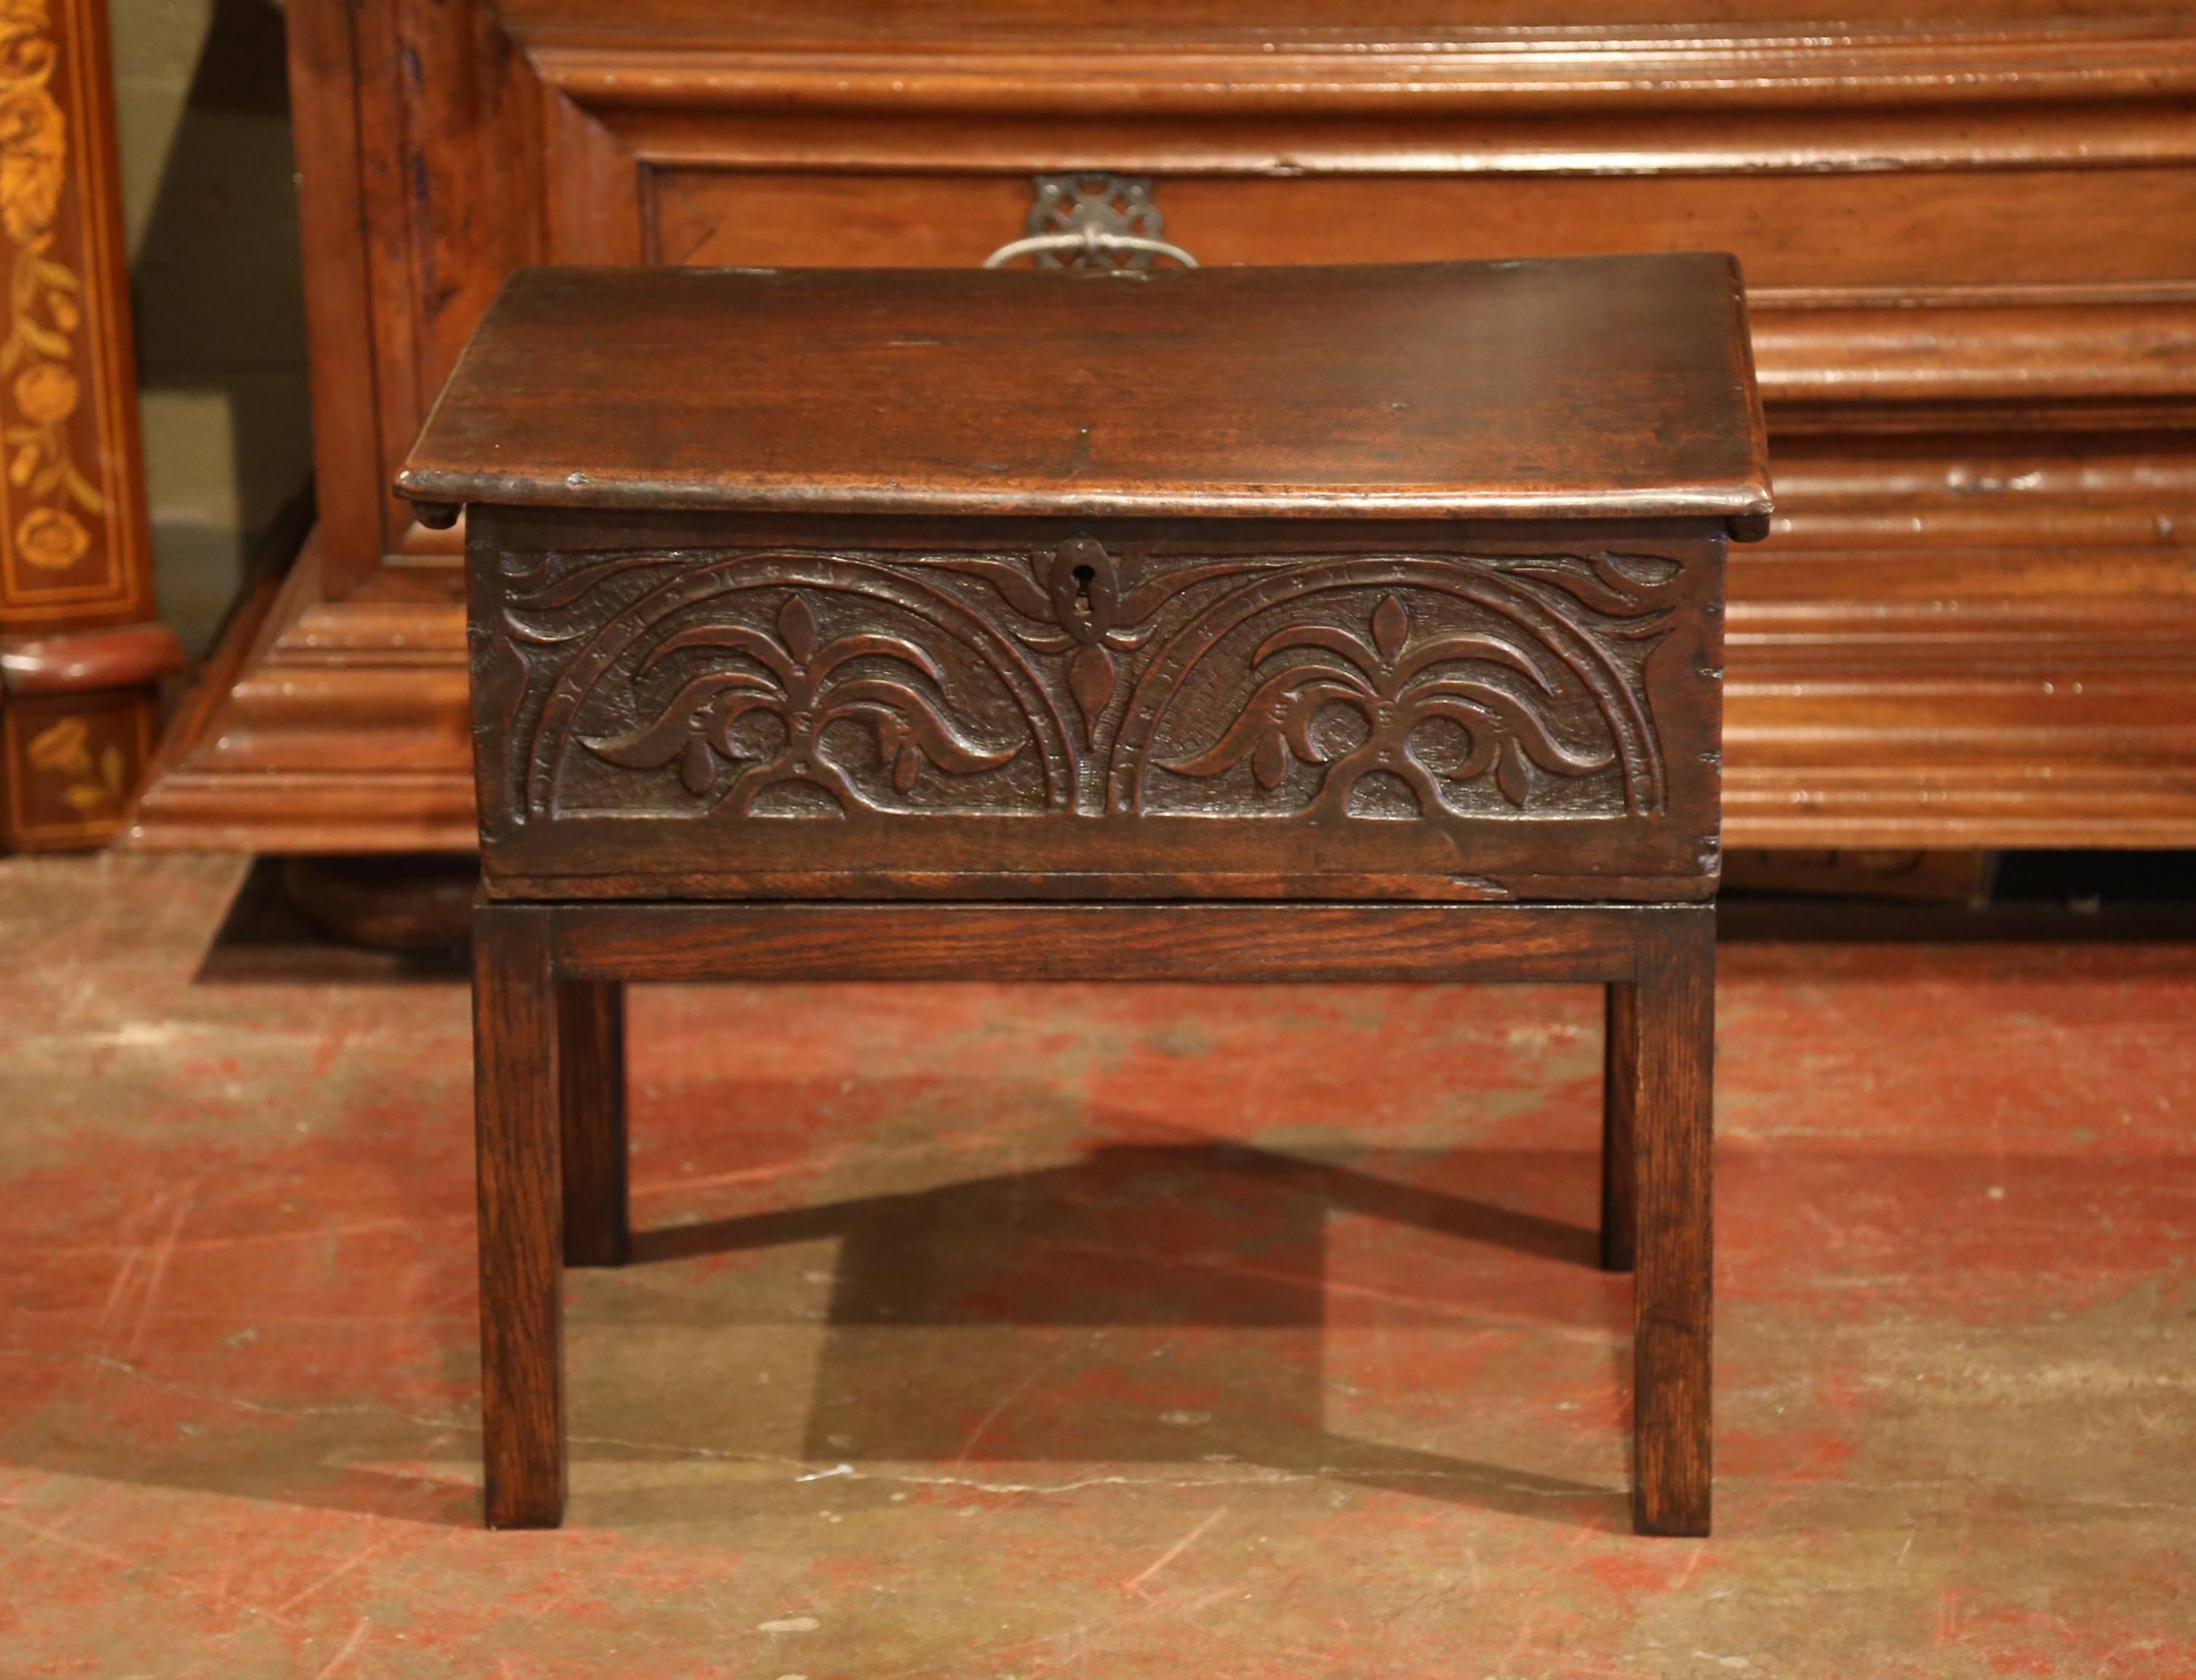 This antique box was carved in France, circa 1780. The trunk features deep carvings on the front with Fleurs-de-Lys on the facade, and opens from the top for inside storage. New legs have been adapted to the piece and turned it into a small end